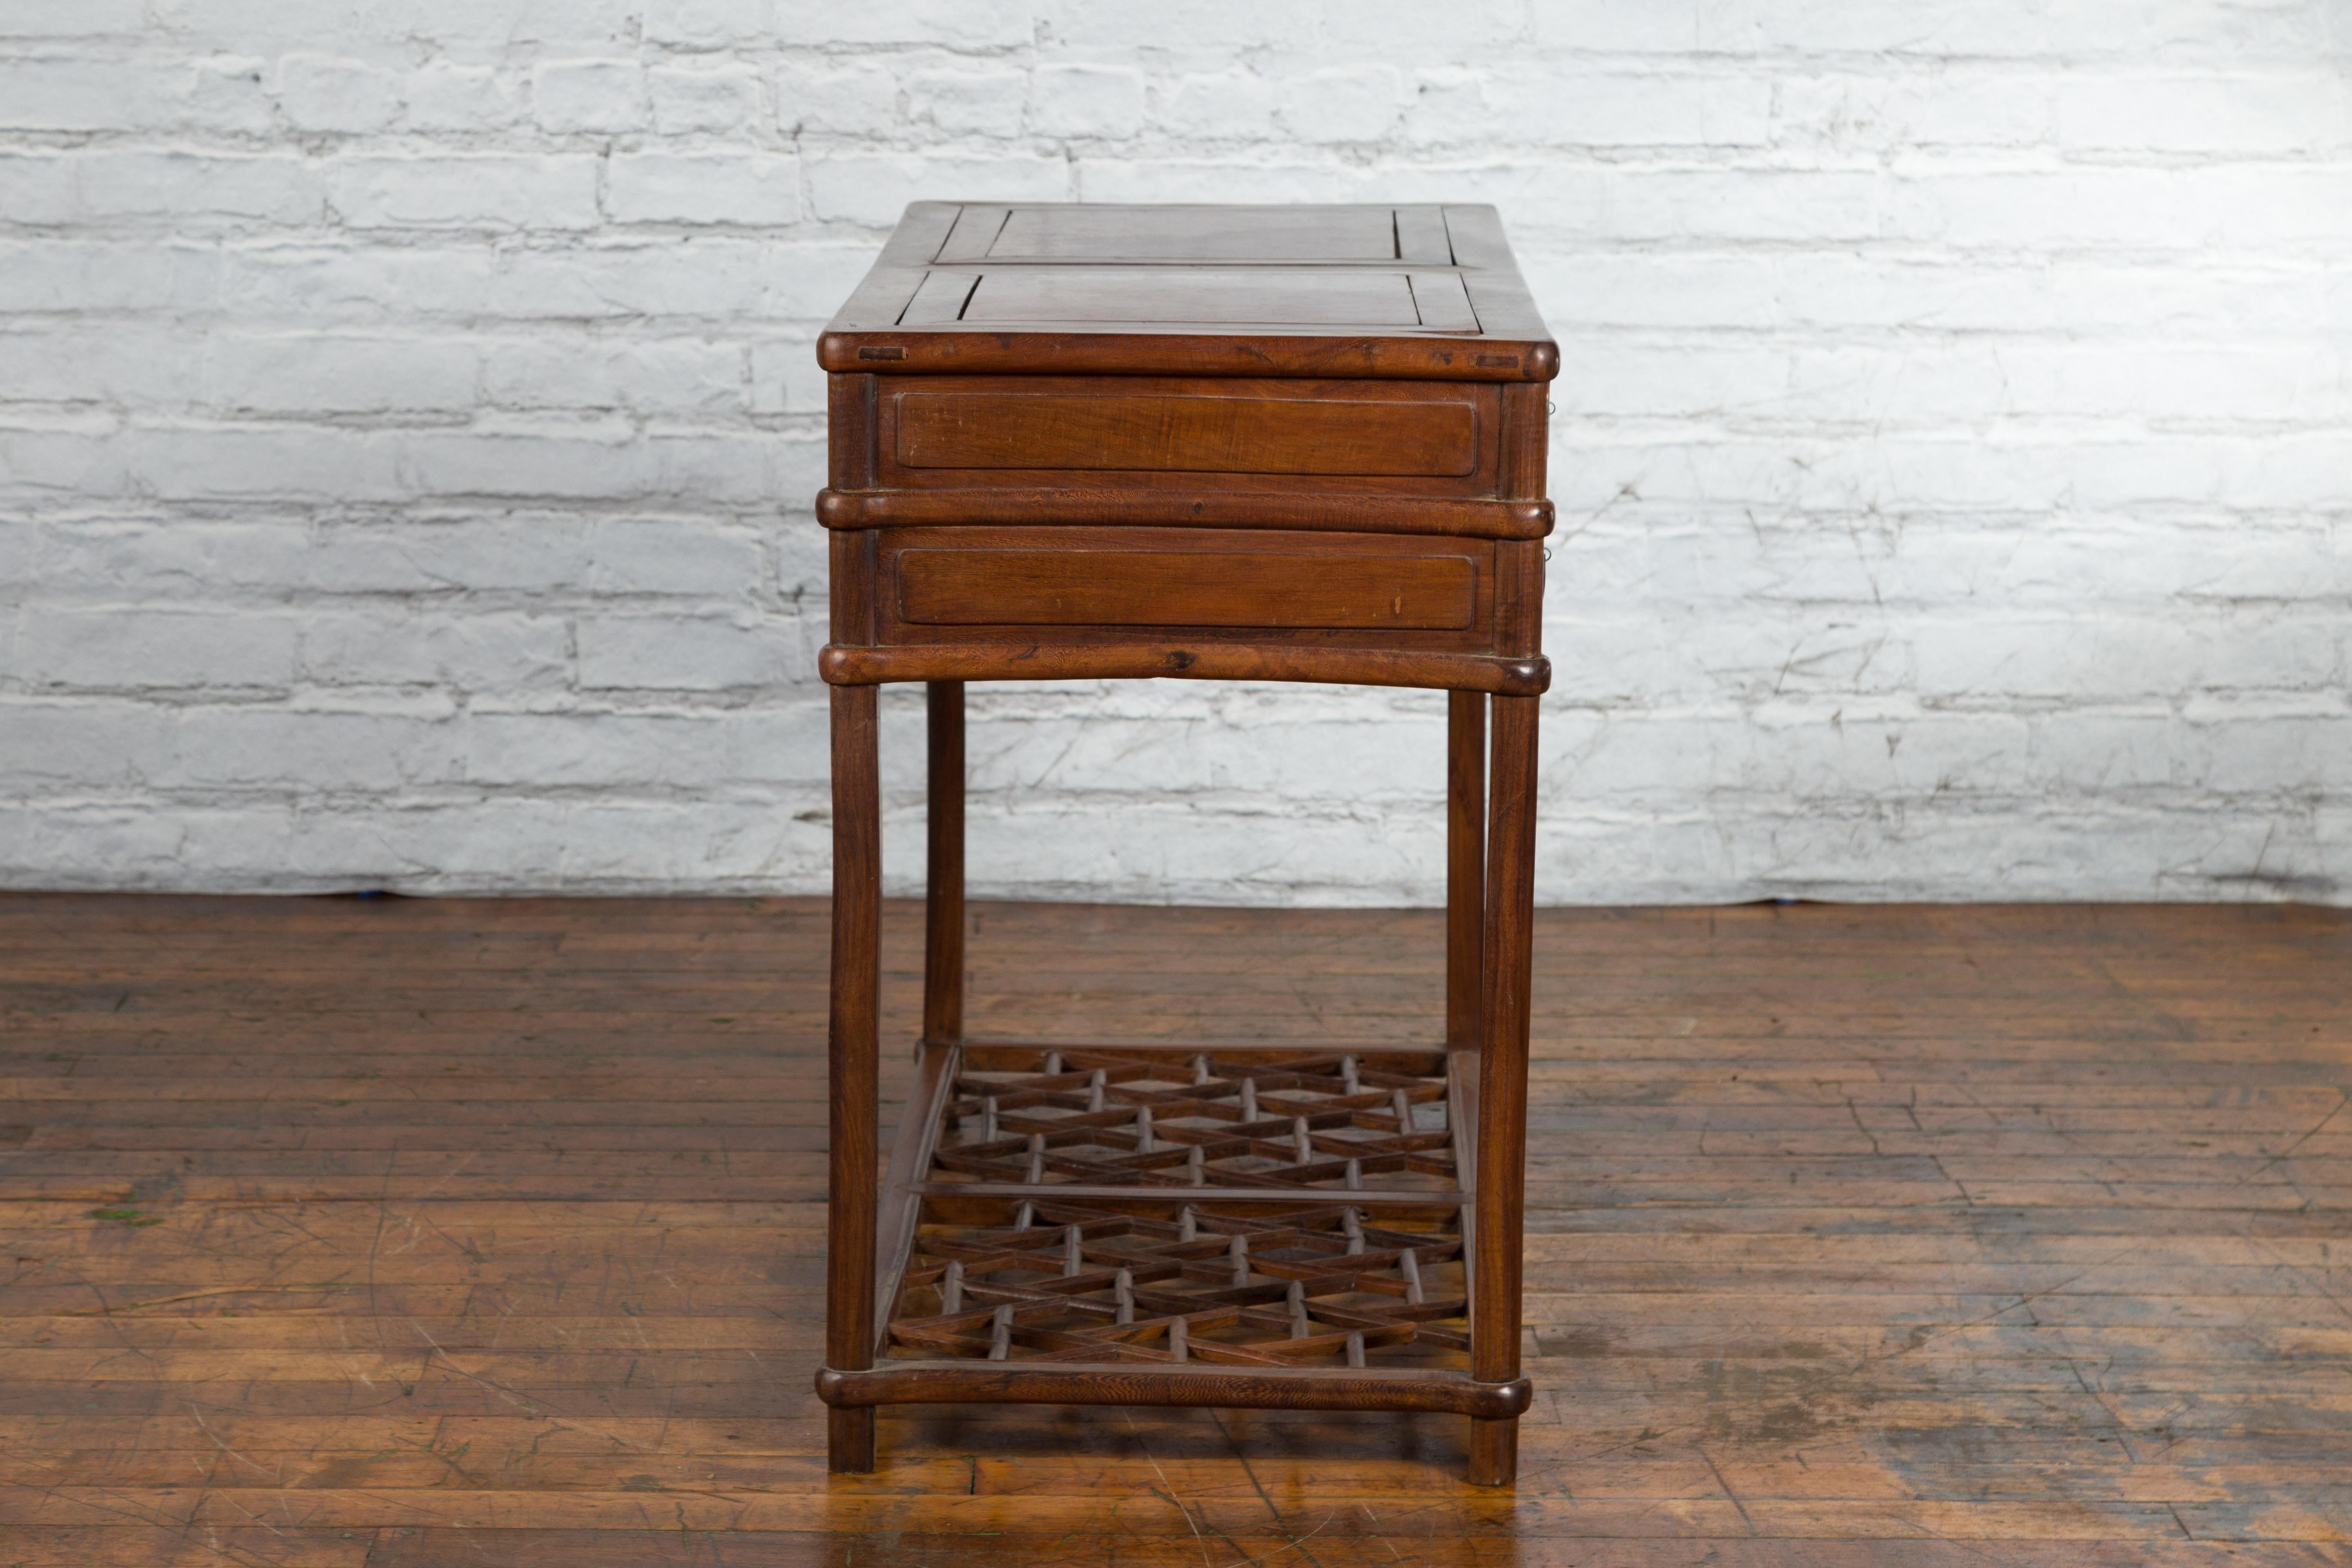 Qing Dynasty 19th Century Desk with Burlwood Top, Drawers and Cracked Ice Shelf For Sale 5